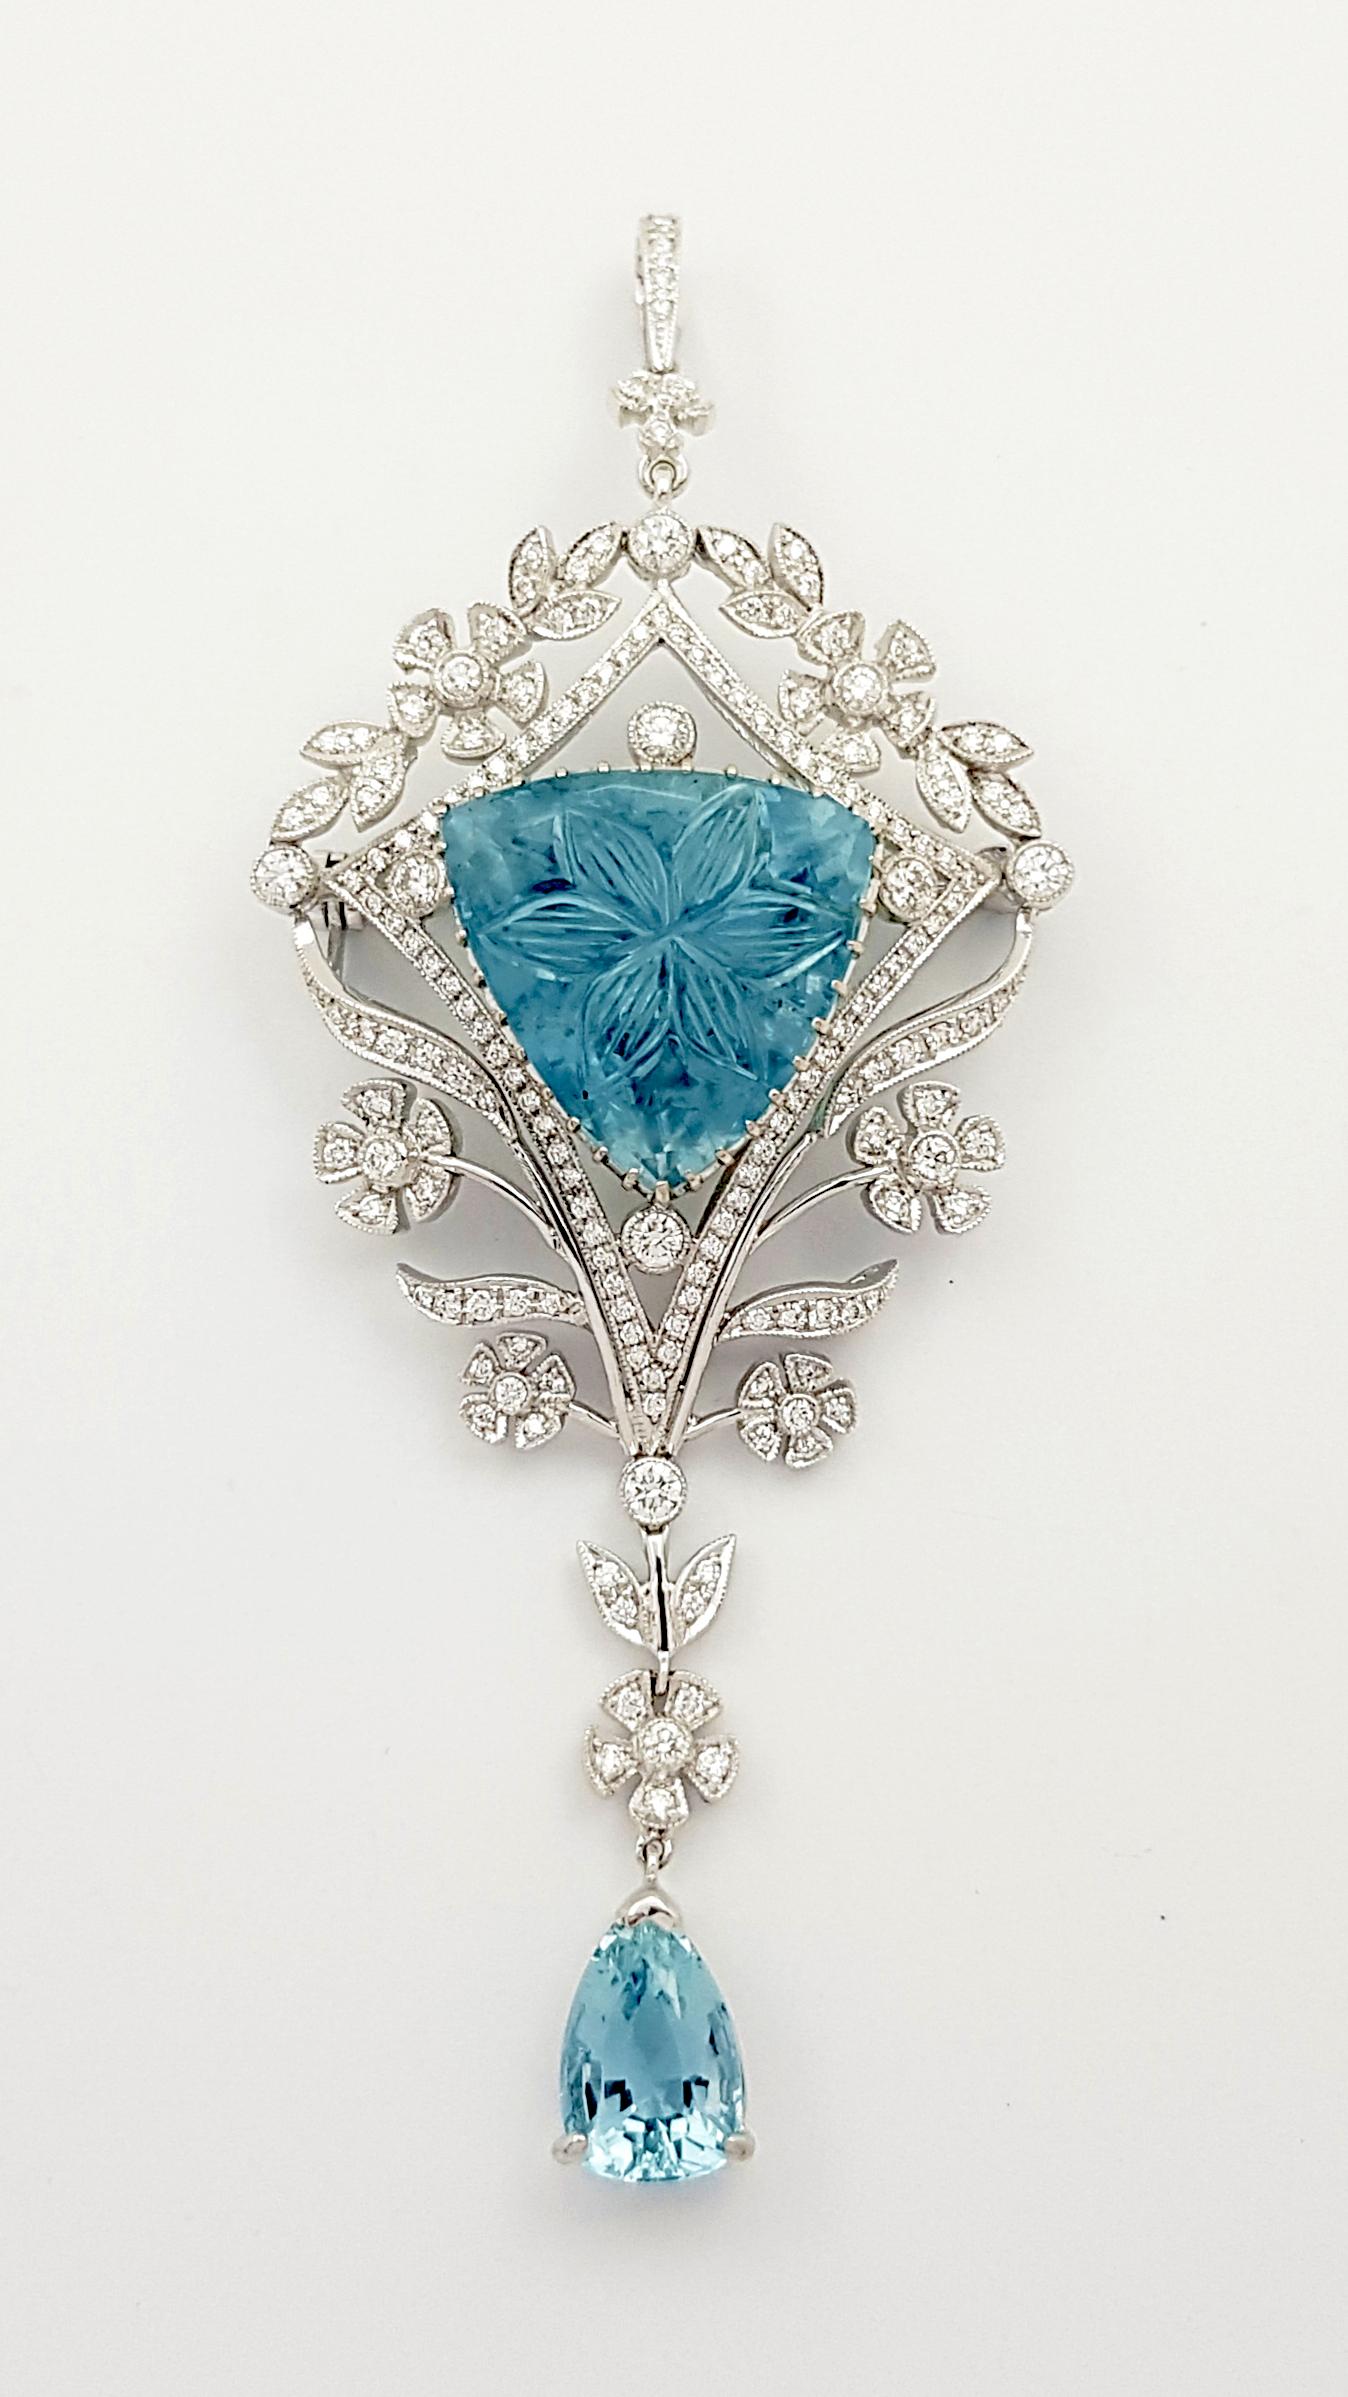 Cabochon Aquamarine 17.97 carats, Aquamarine 2.37 carats and Diamond 1.36 carats Brooch/Pendant set in 18K White Gold Settings
(chain not included)

Width: 3.5 cm 
Length: 8.3 cm
Total Weight: 16.06 grams

